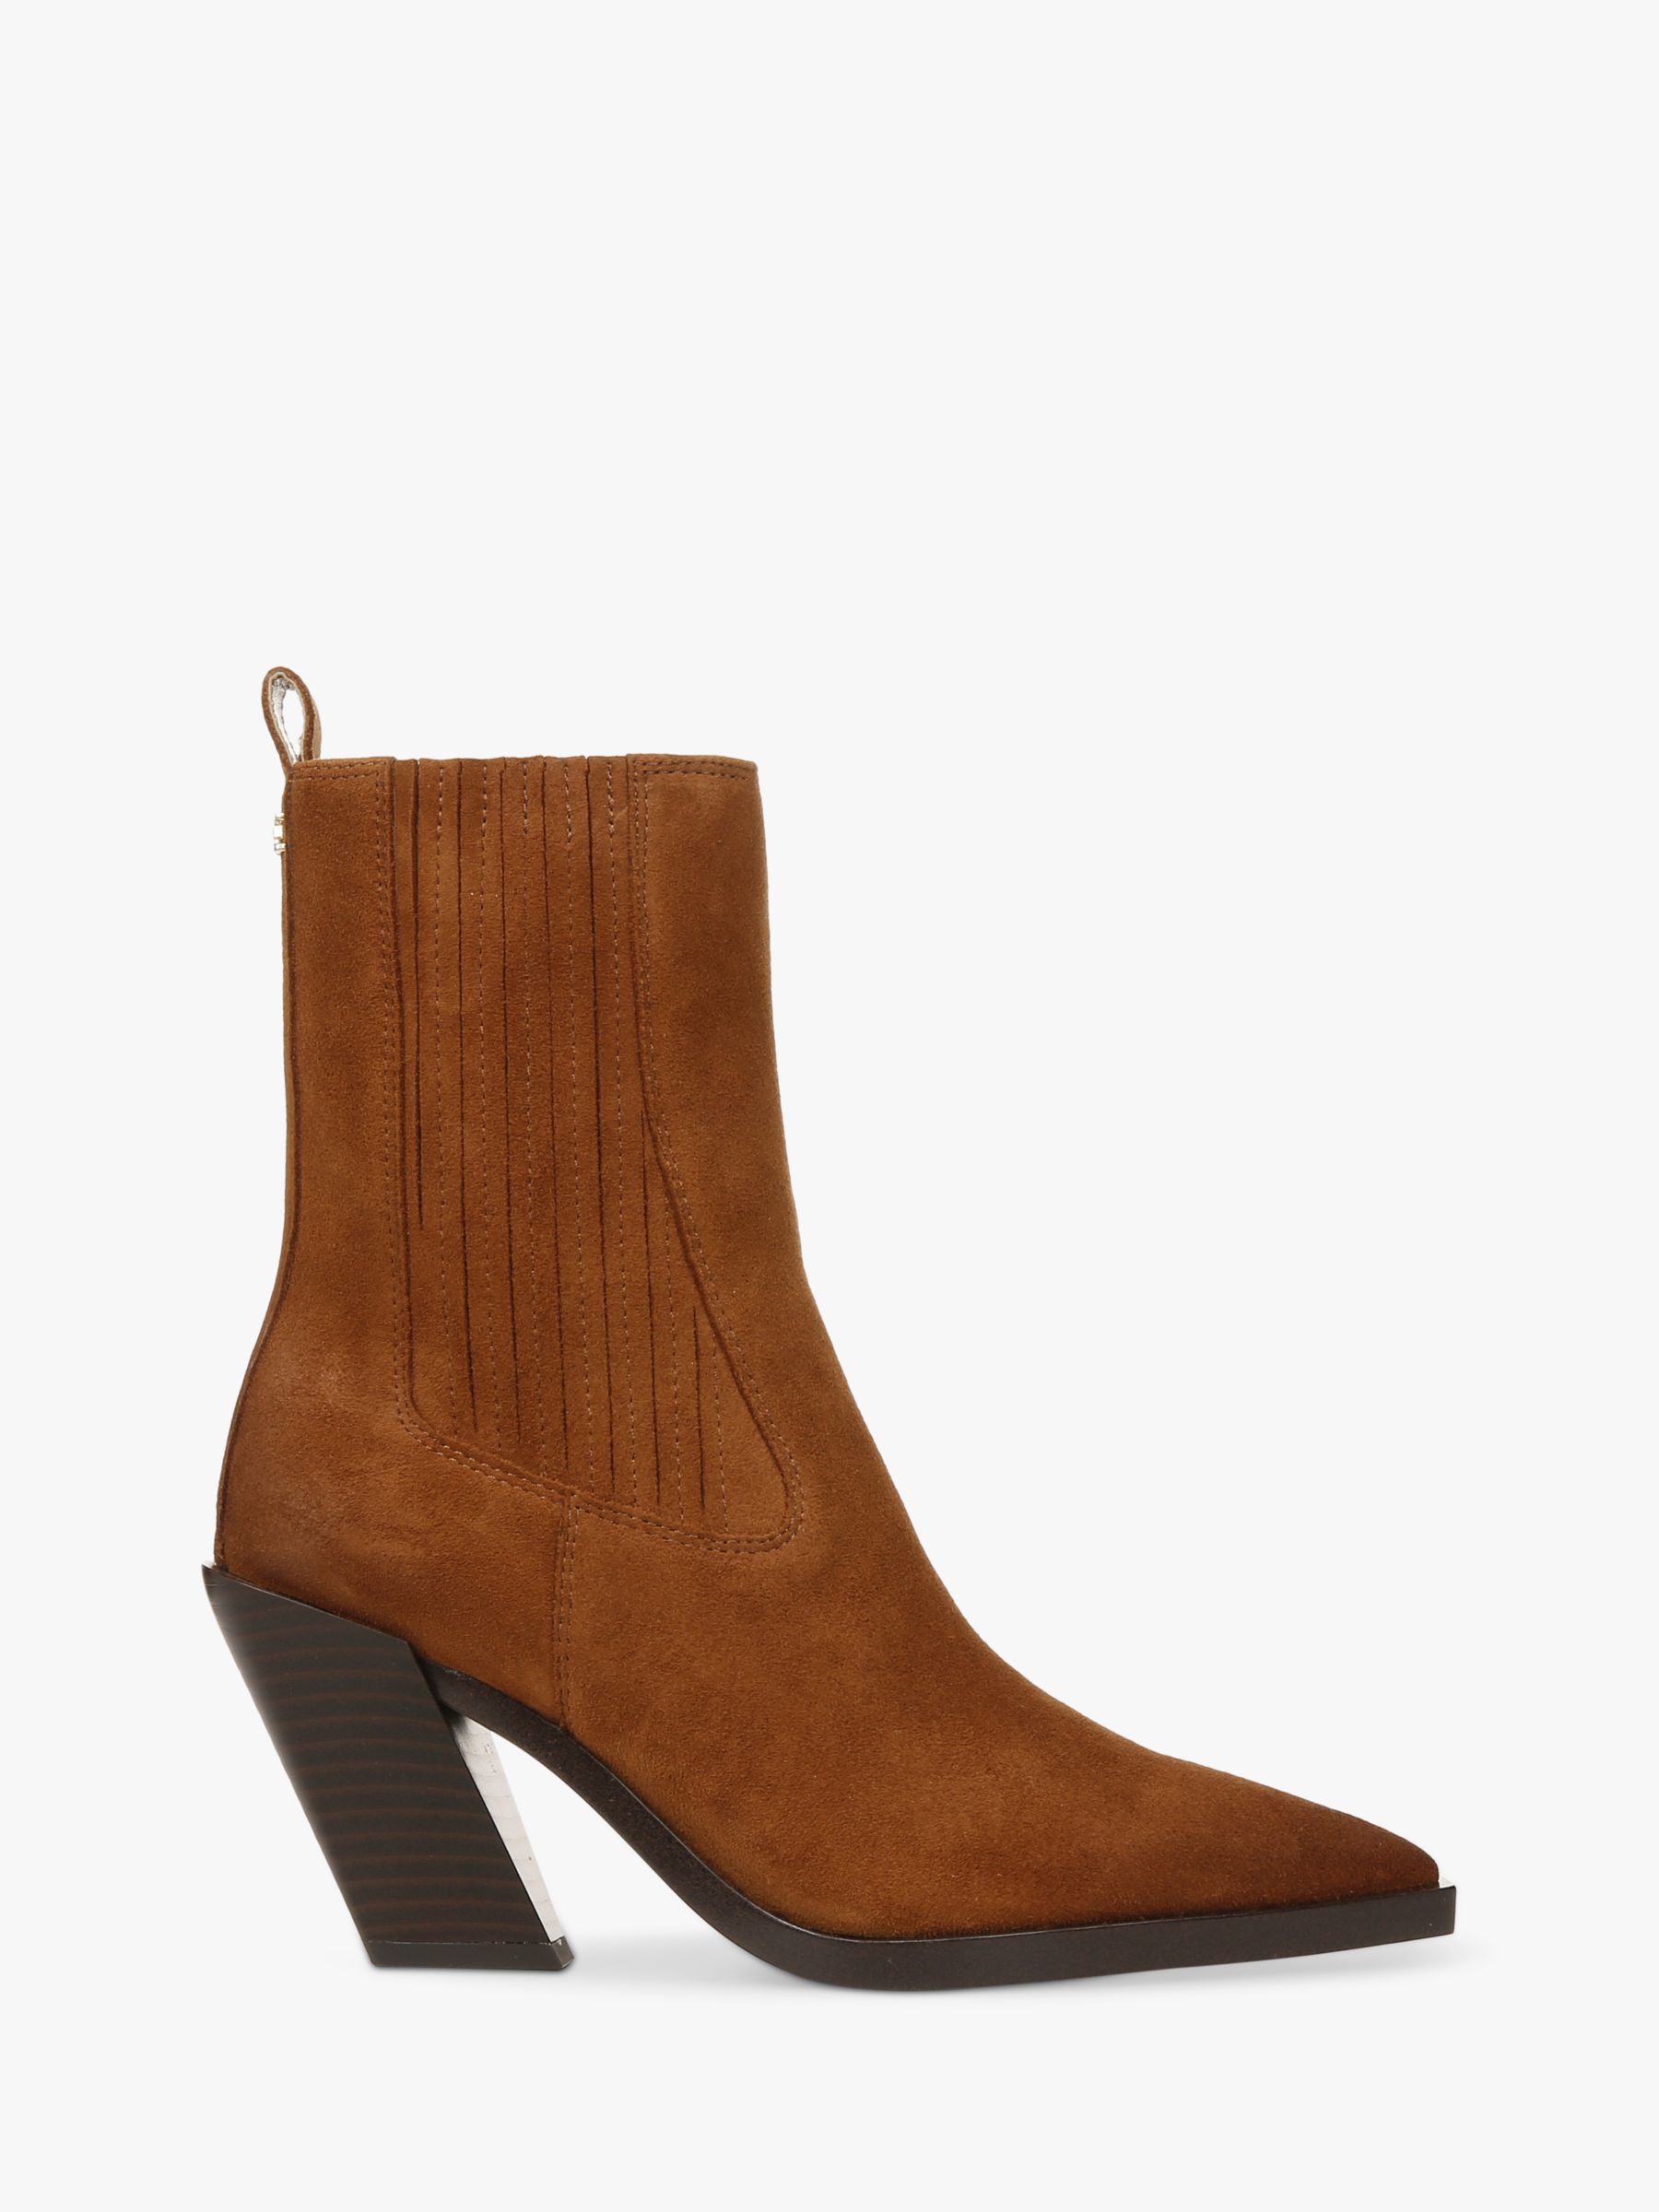 Sam Edelman Mandey Ankle Boots, Frontier Brown at John Lewis & Partners